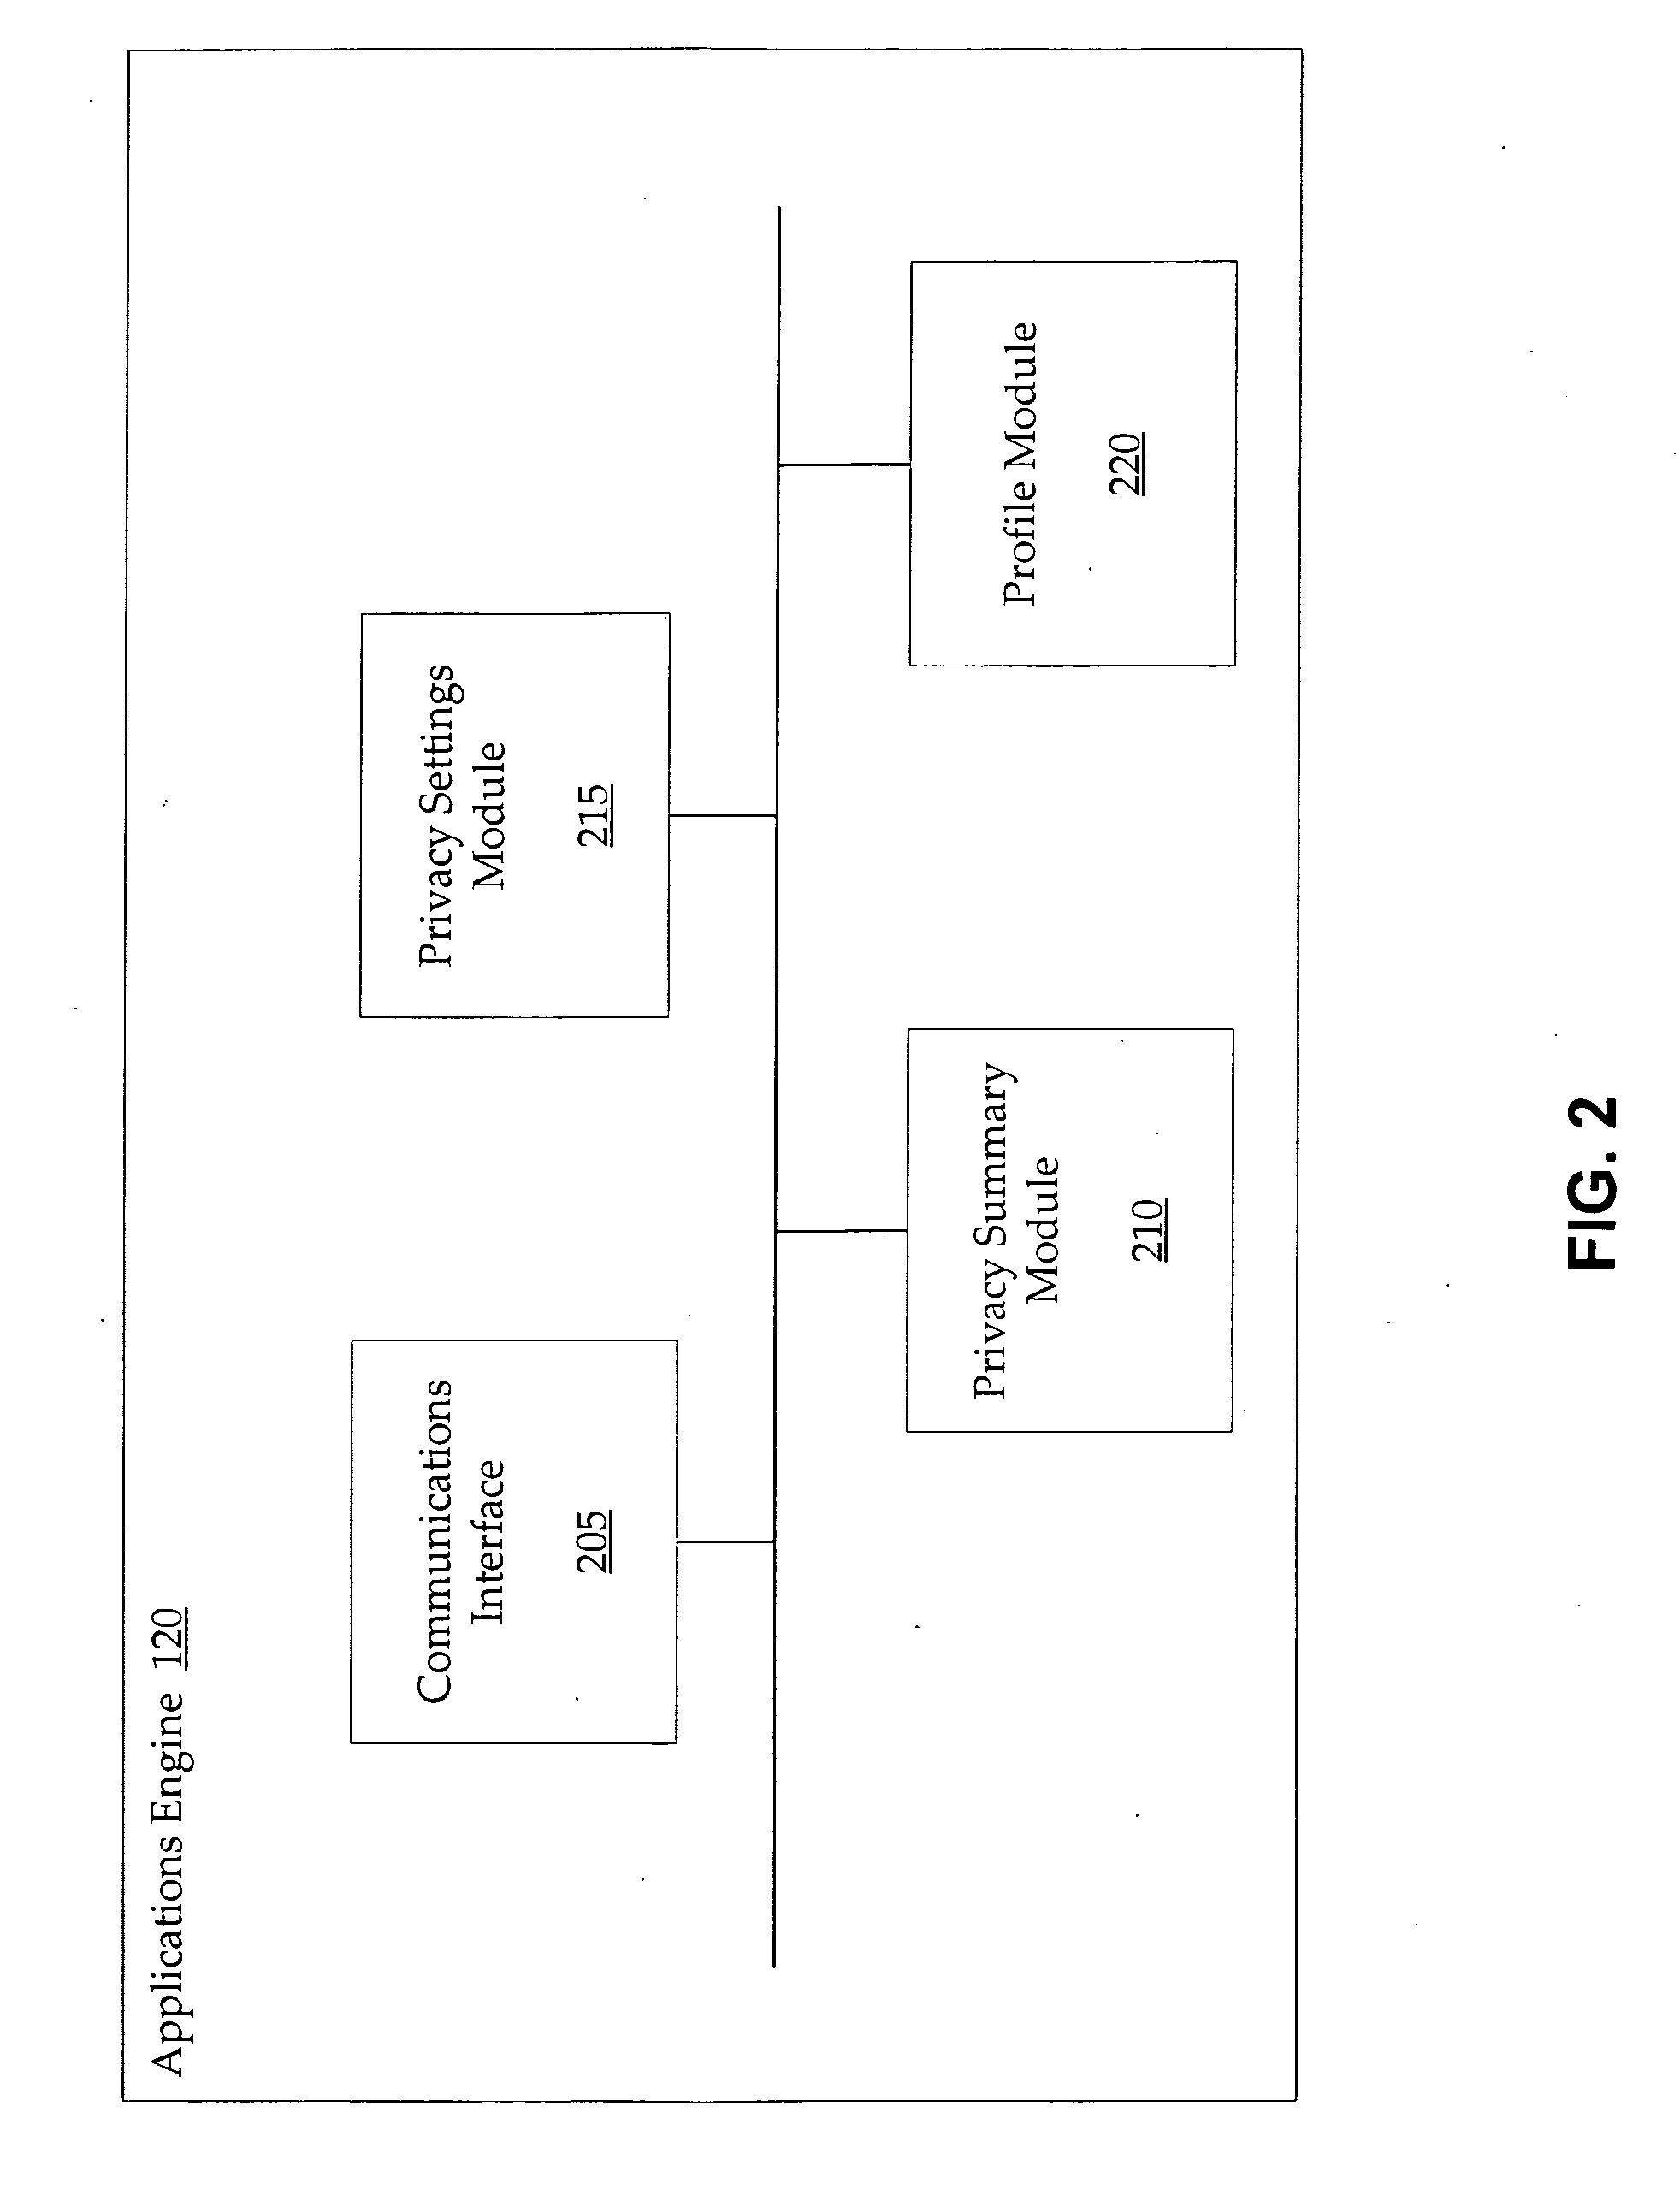 Systems and methods for providing privacy settings for applications associated with a user profile